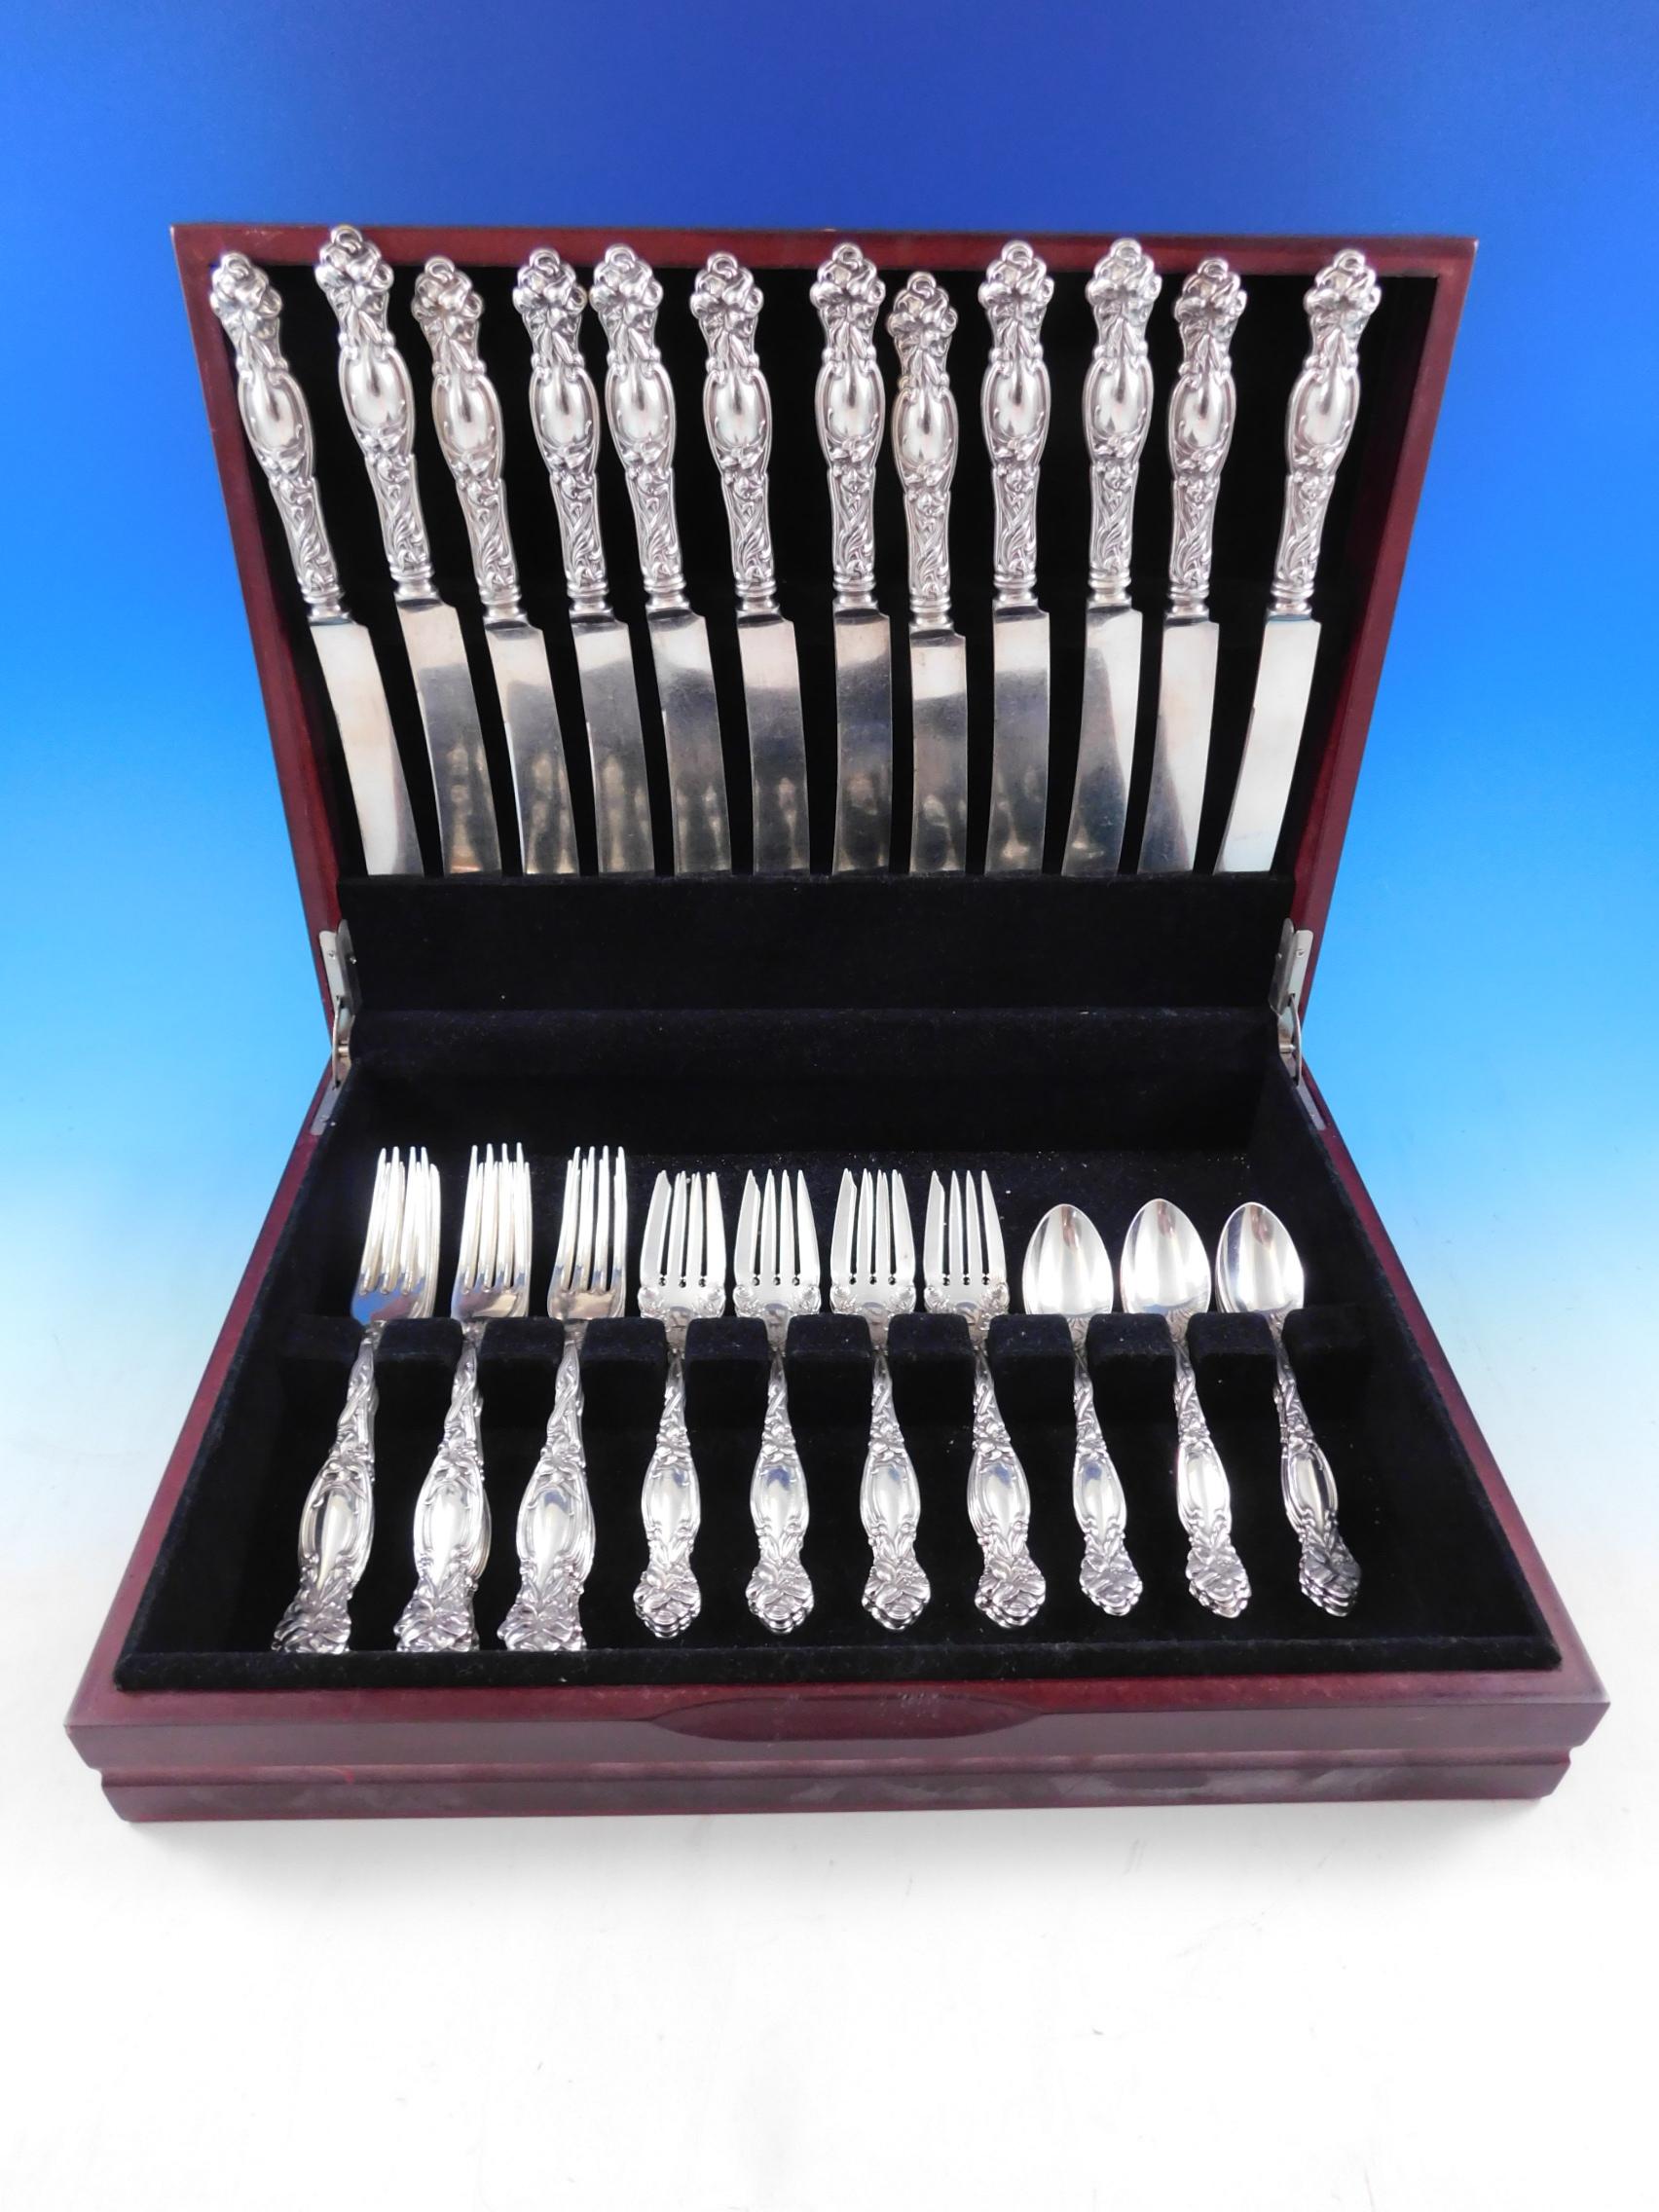 Frontenac by International sterling silver flatware set, 48 pieces. This set includes:

12 knives, 8 7/8